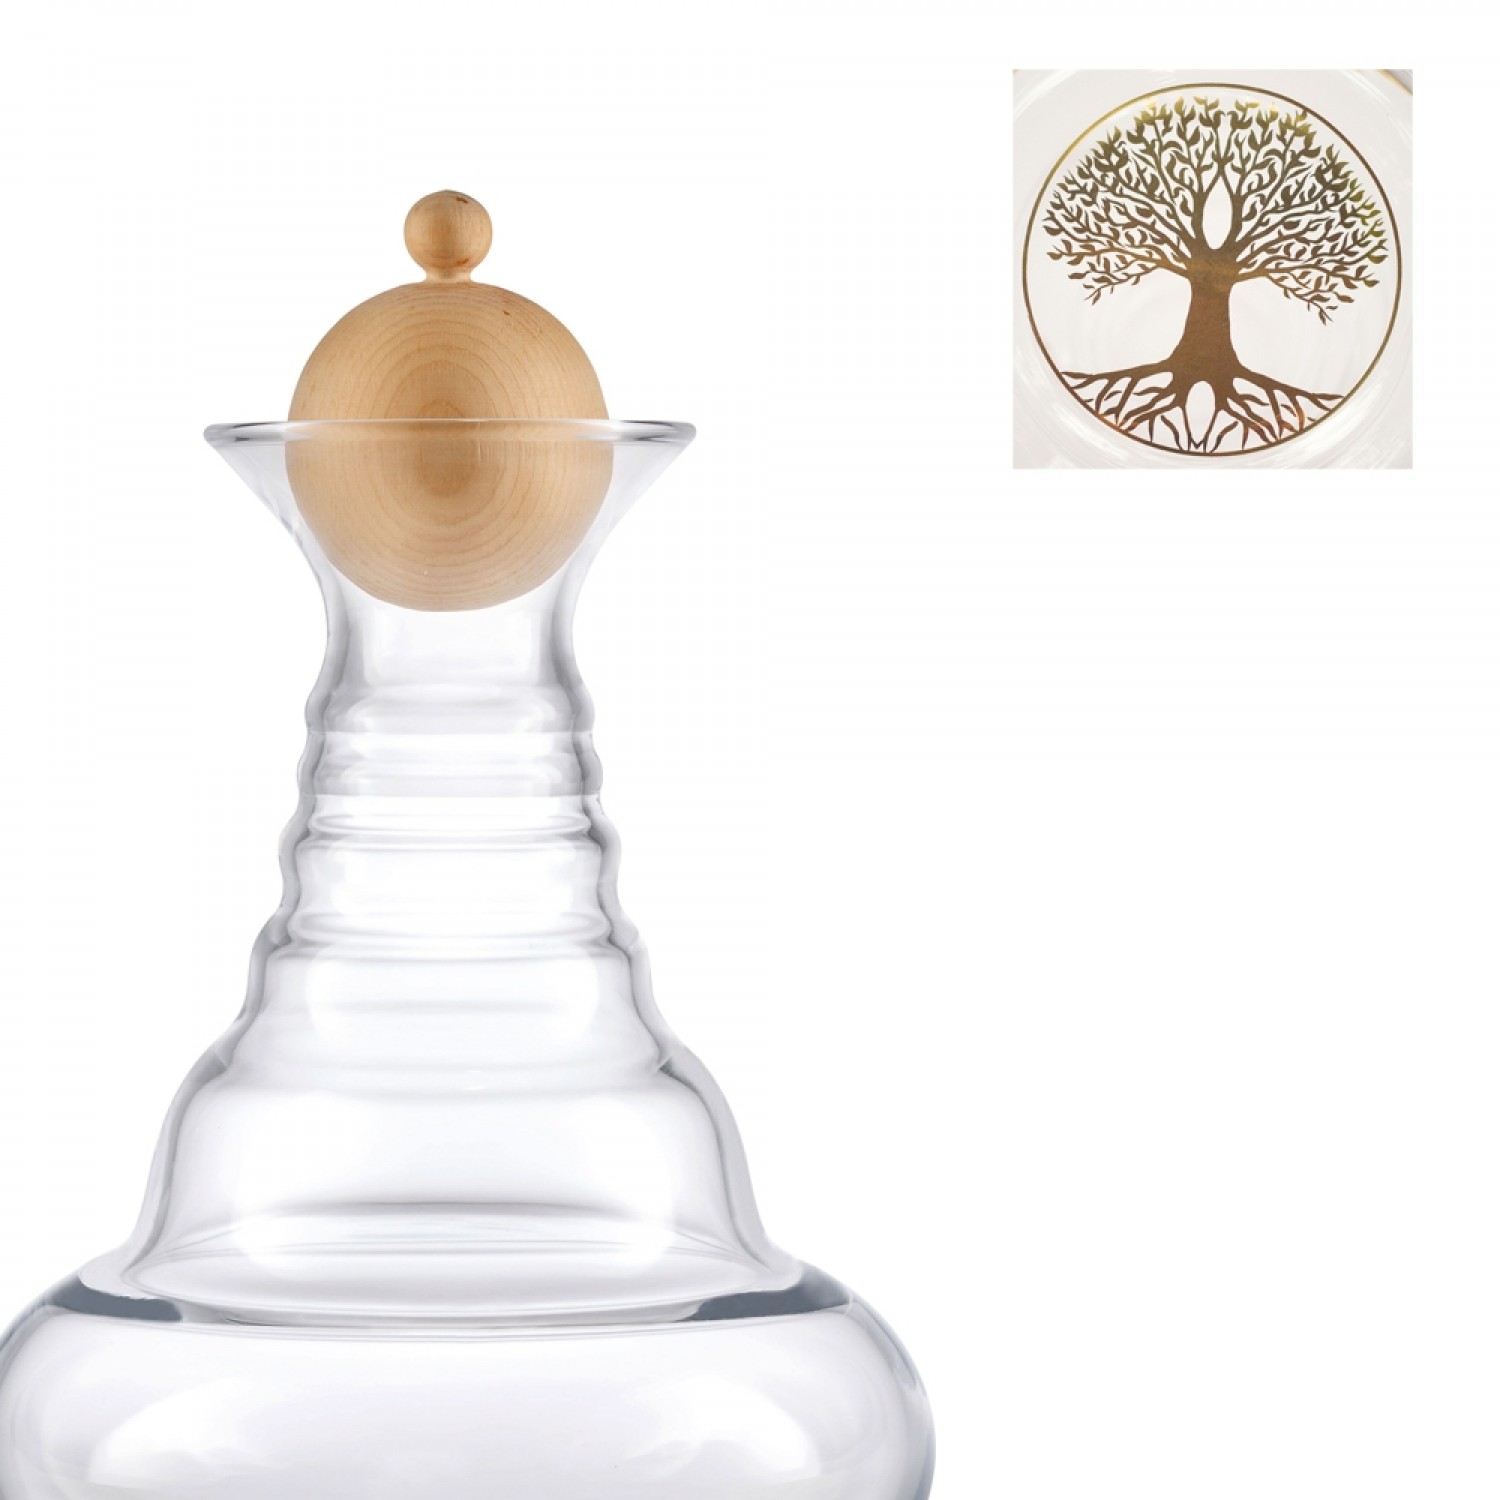 Nature’s Design Carafe Alladin Tree of Life gold, Swiss pine top